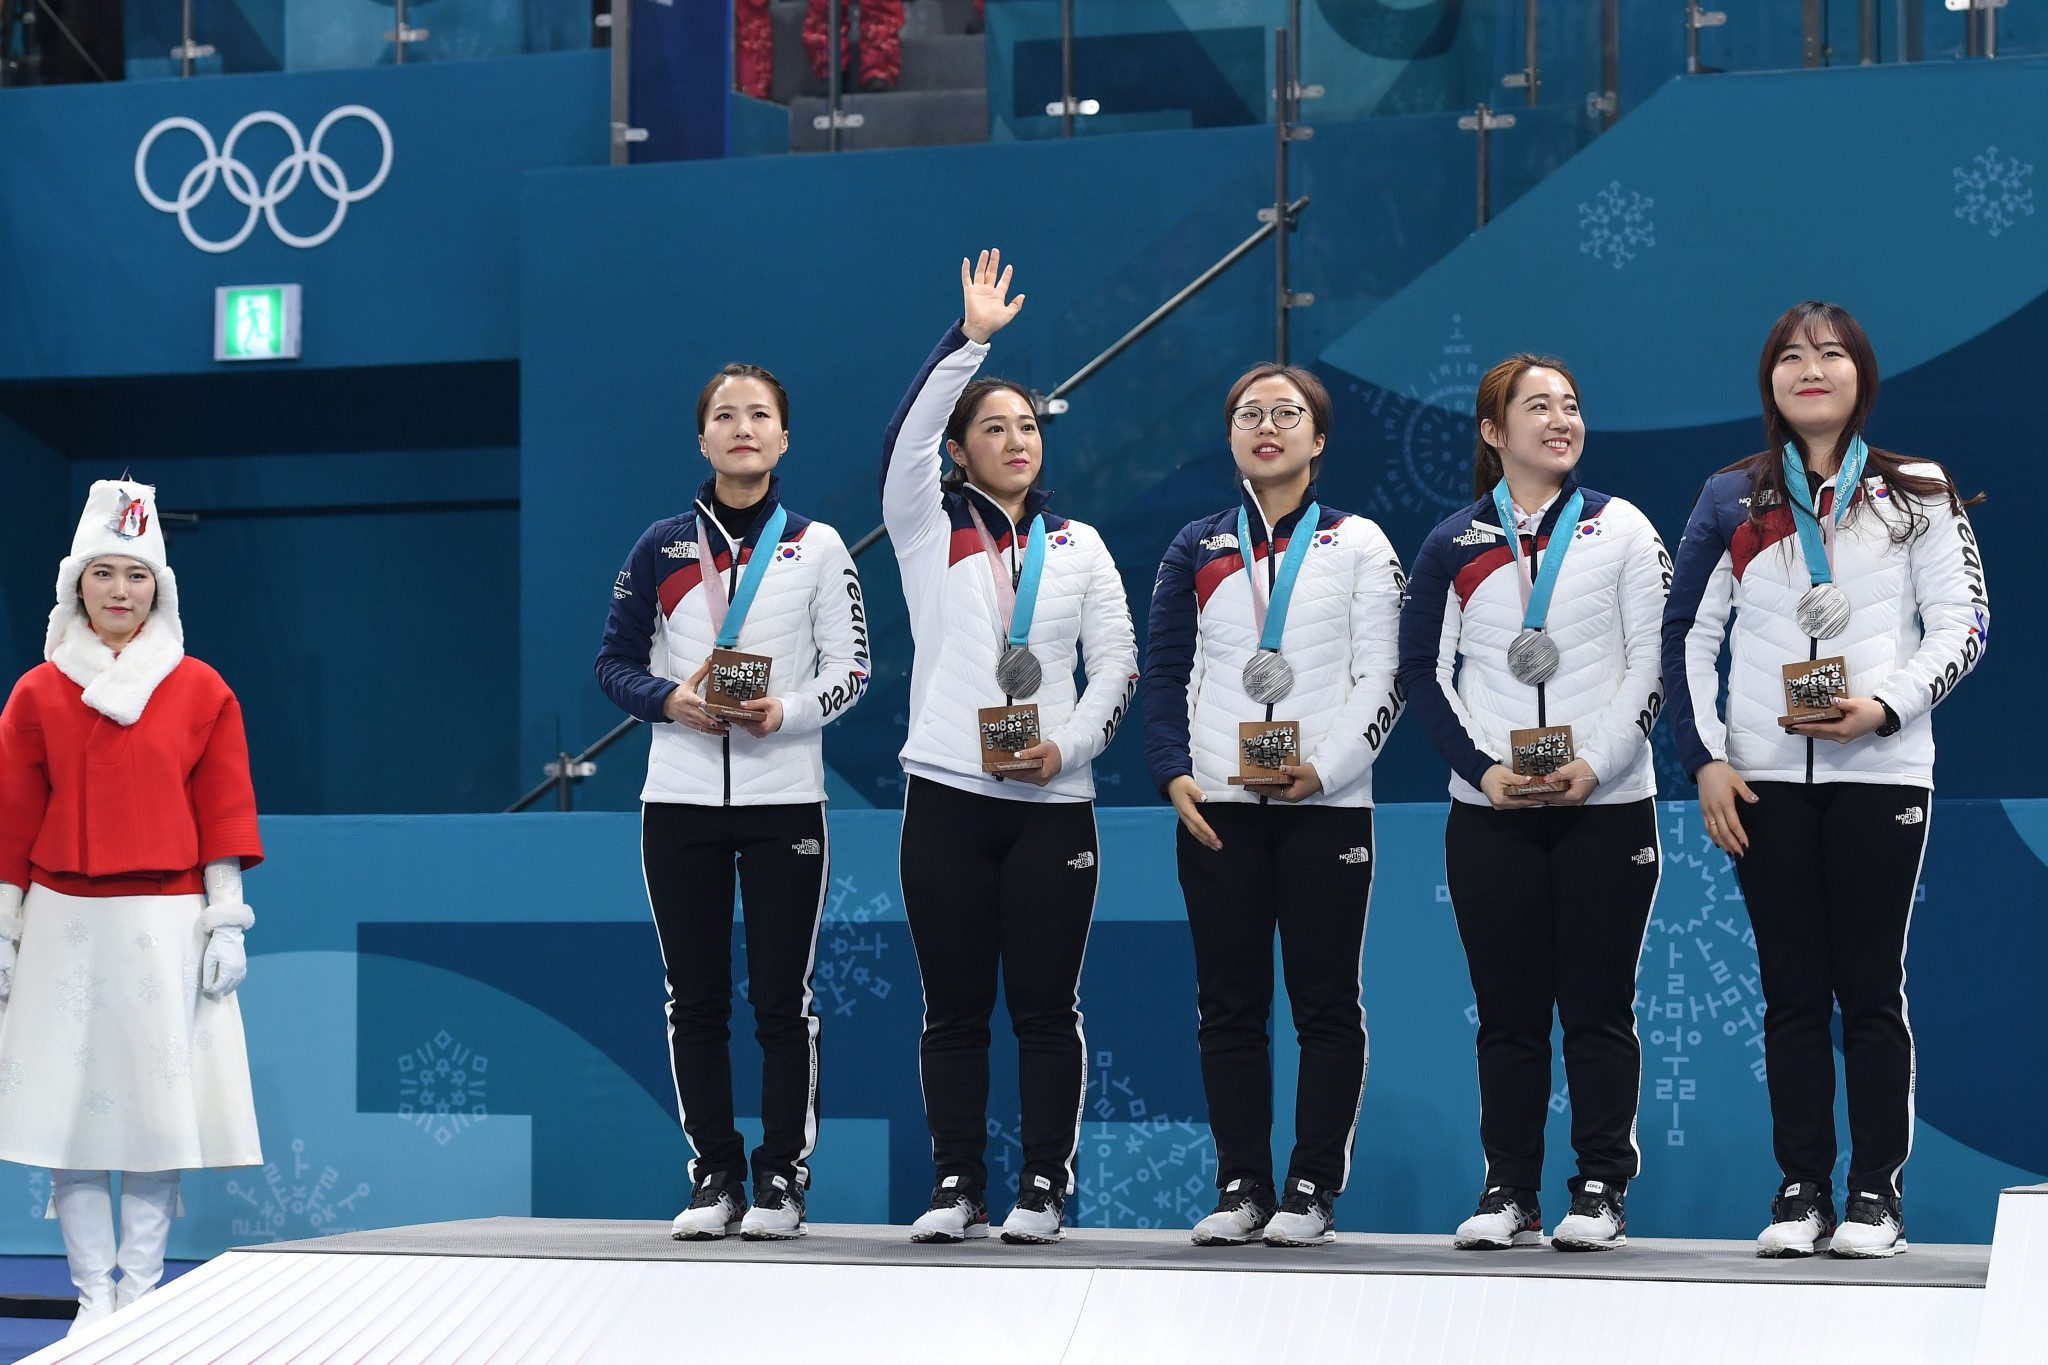 The South Korean women's curling team won their country's first Olympic medal in curling after achieving silver at the 2018 Pyeongchang Winter Games ©Getty Images